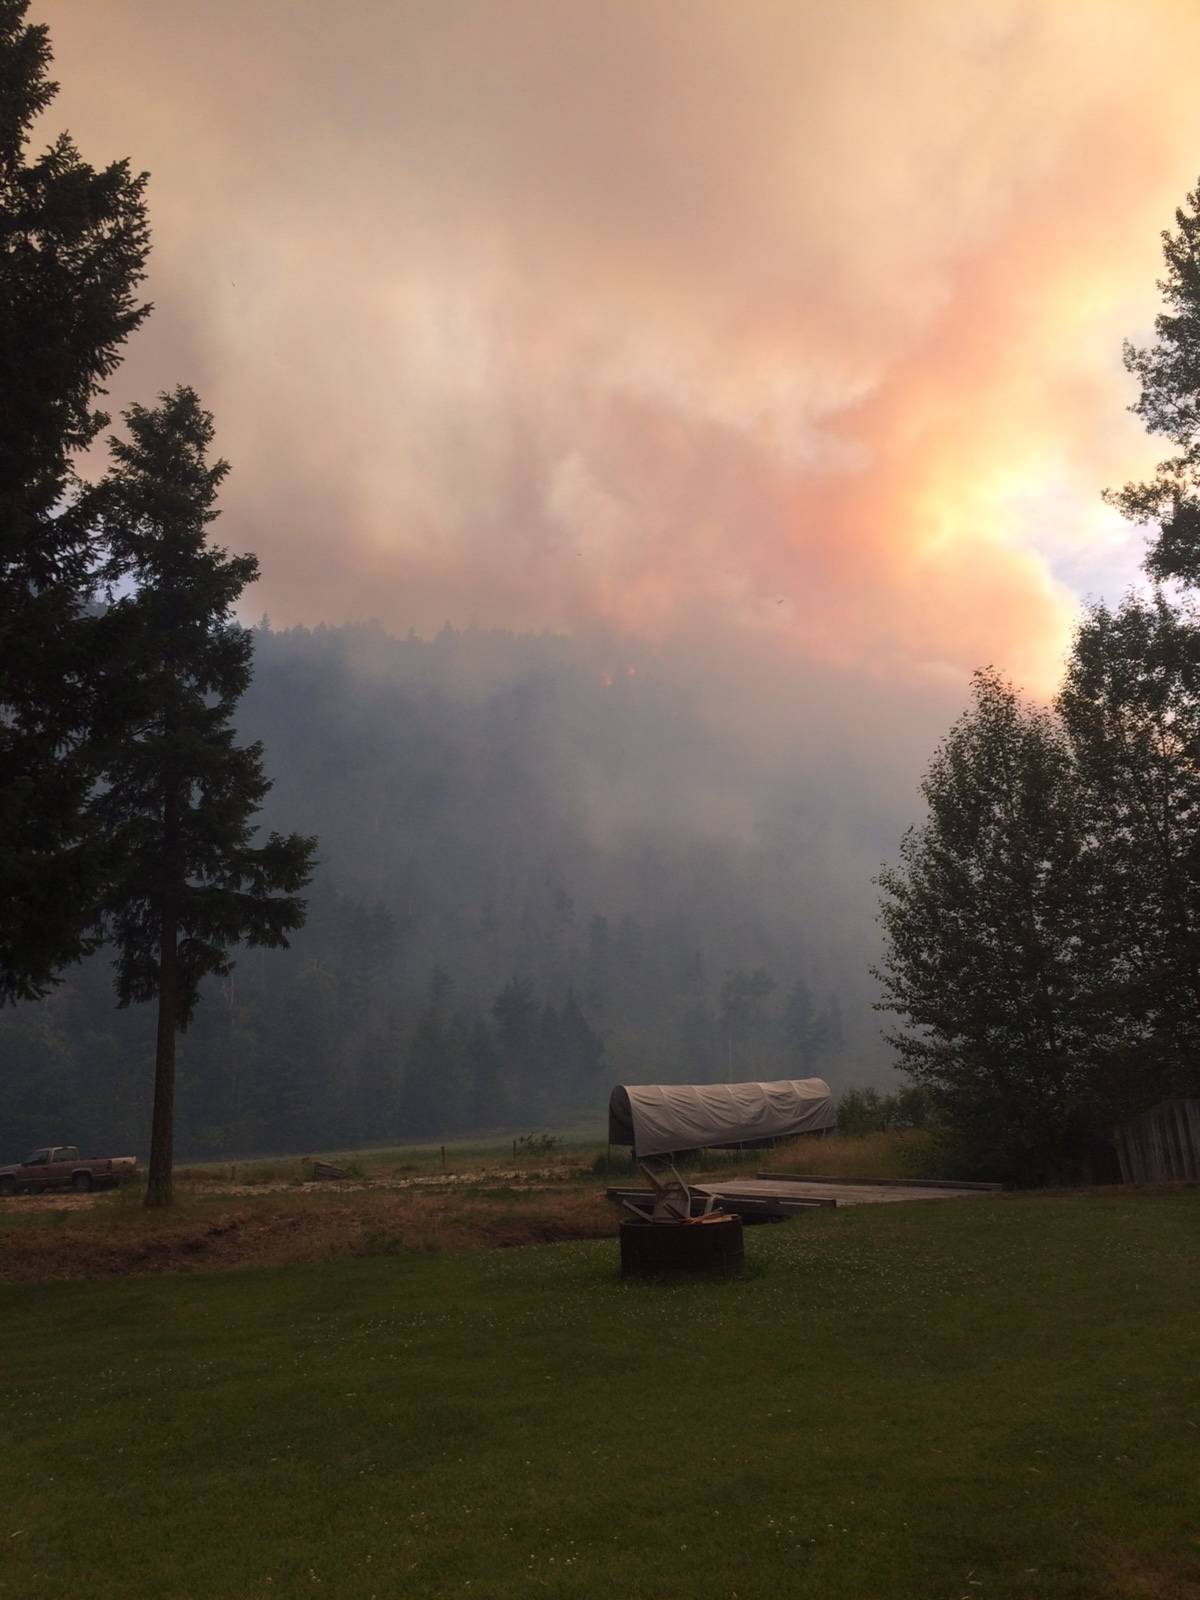 The Princeton fire in photos